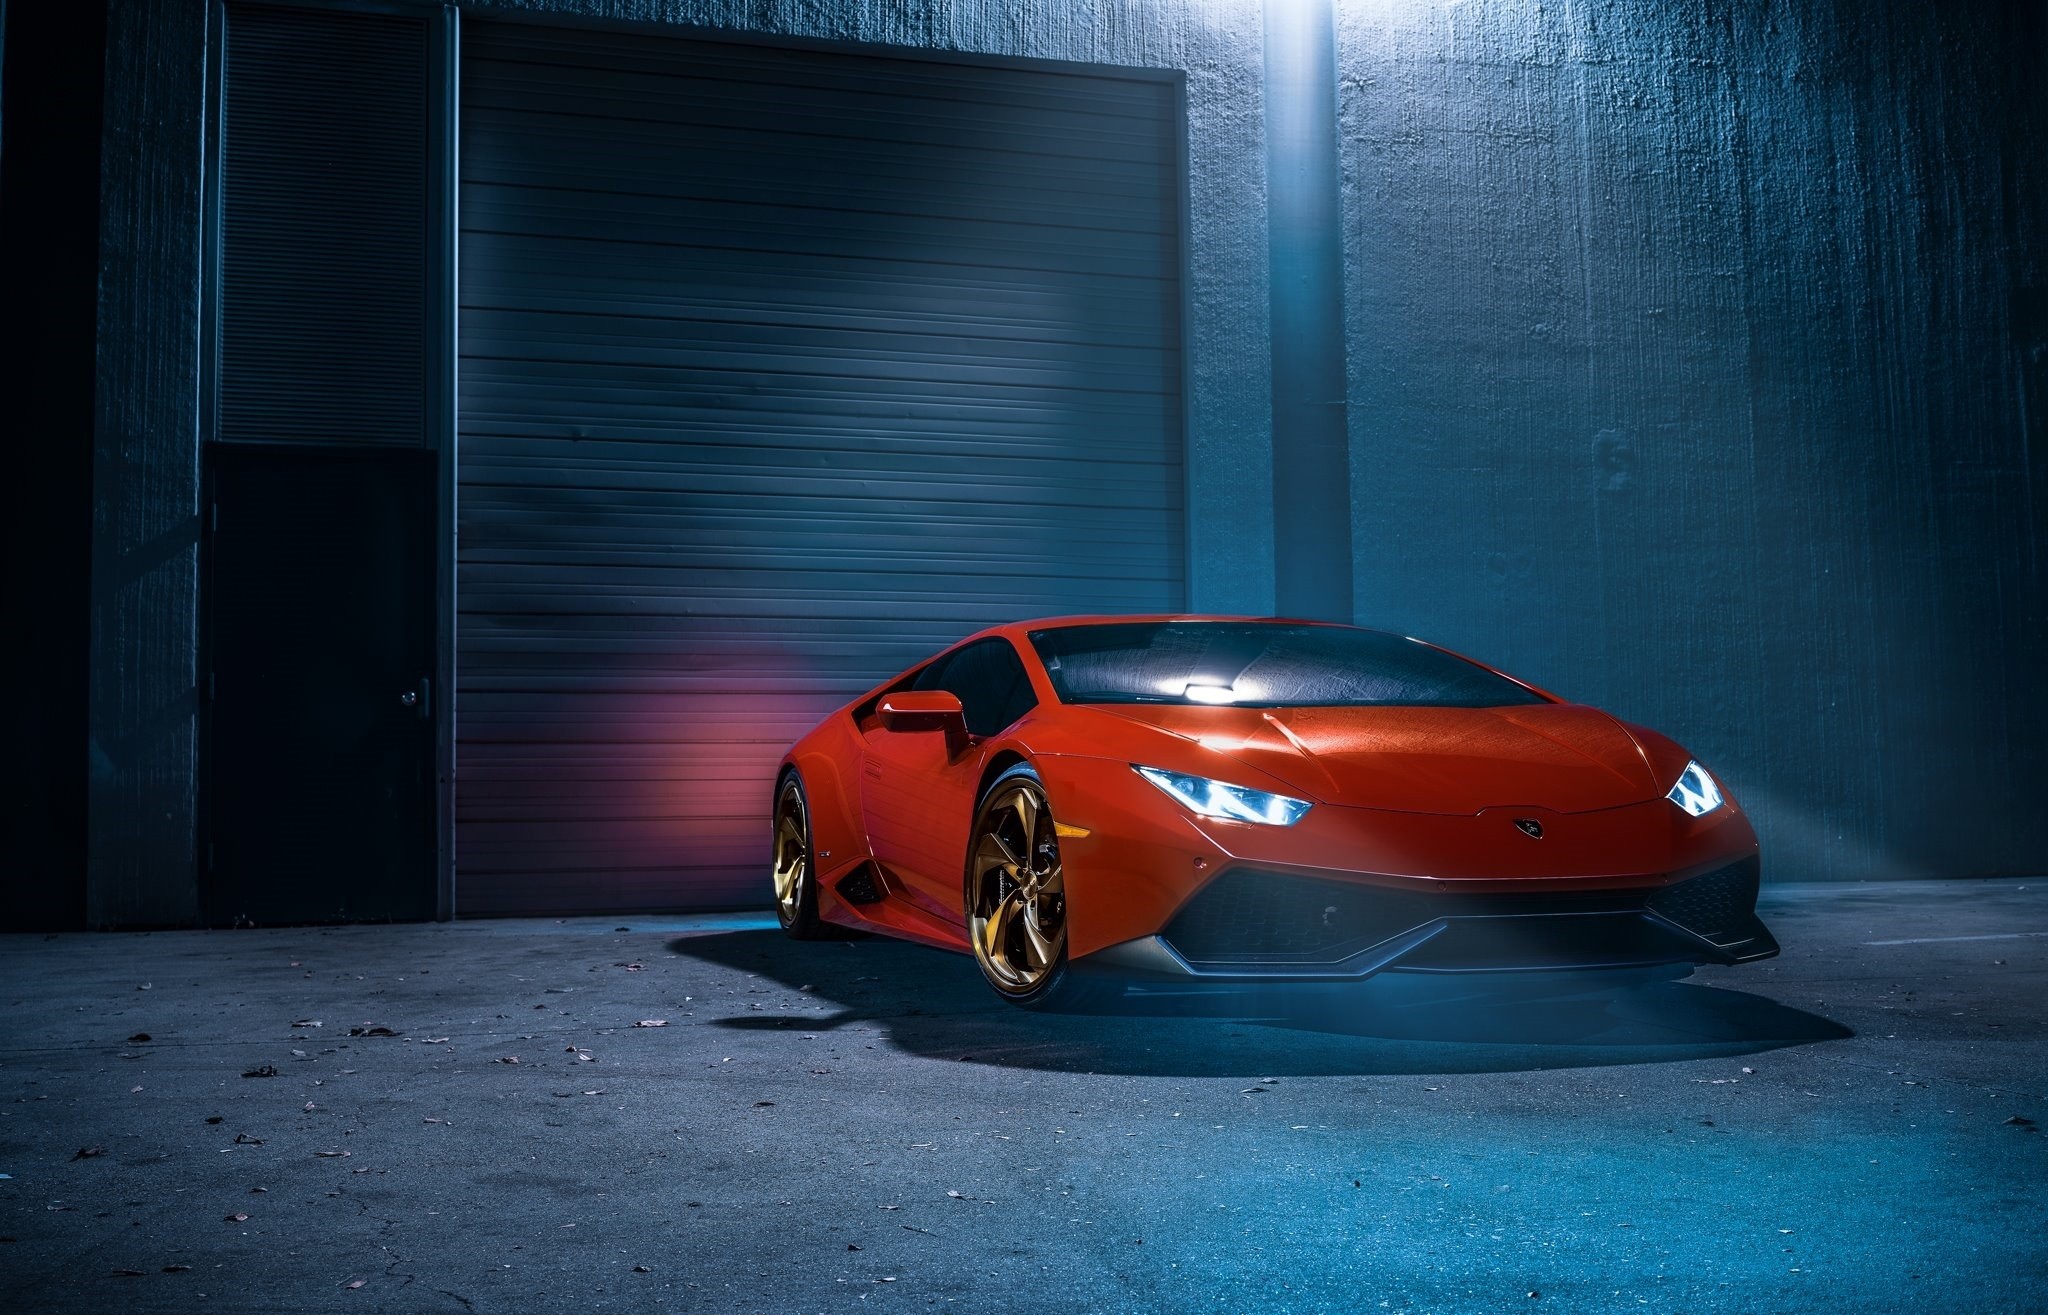 Lamborghini Huracan LP 610 4, Lamborghini, Lamborghini Huracan, Supercars, Red Wallpaper